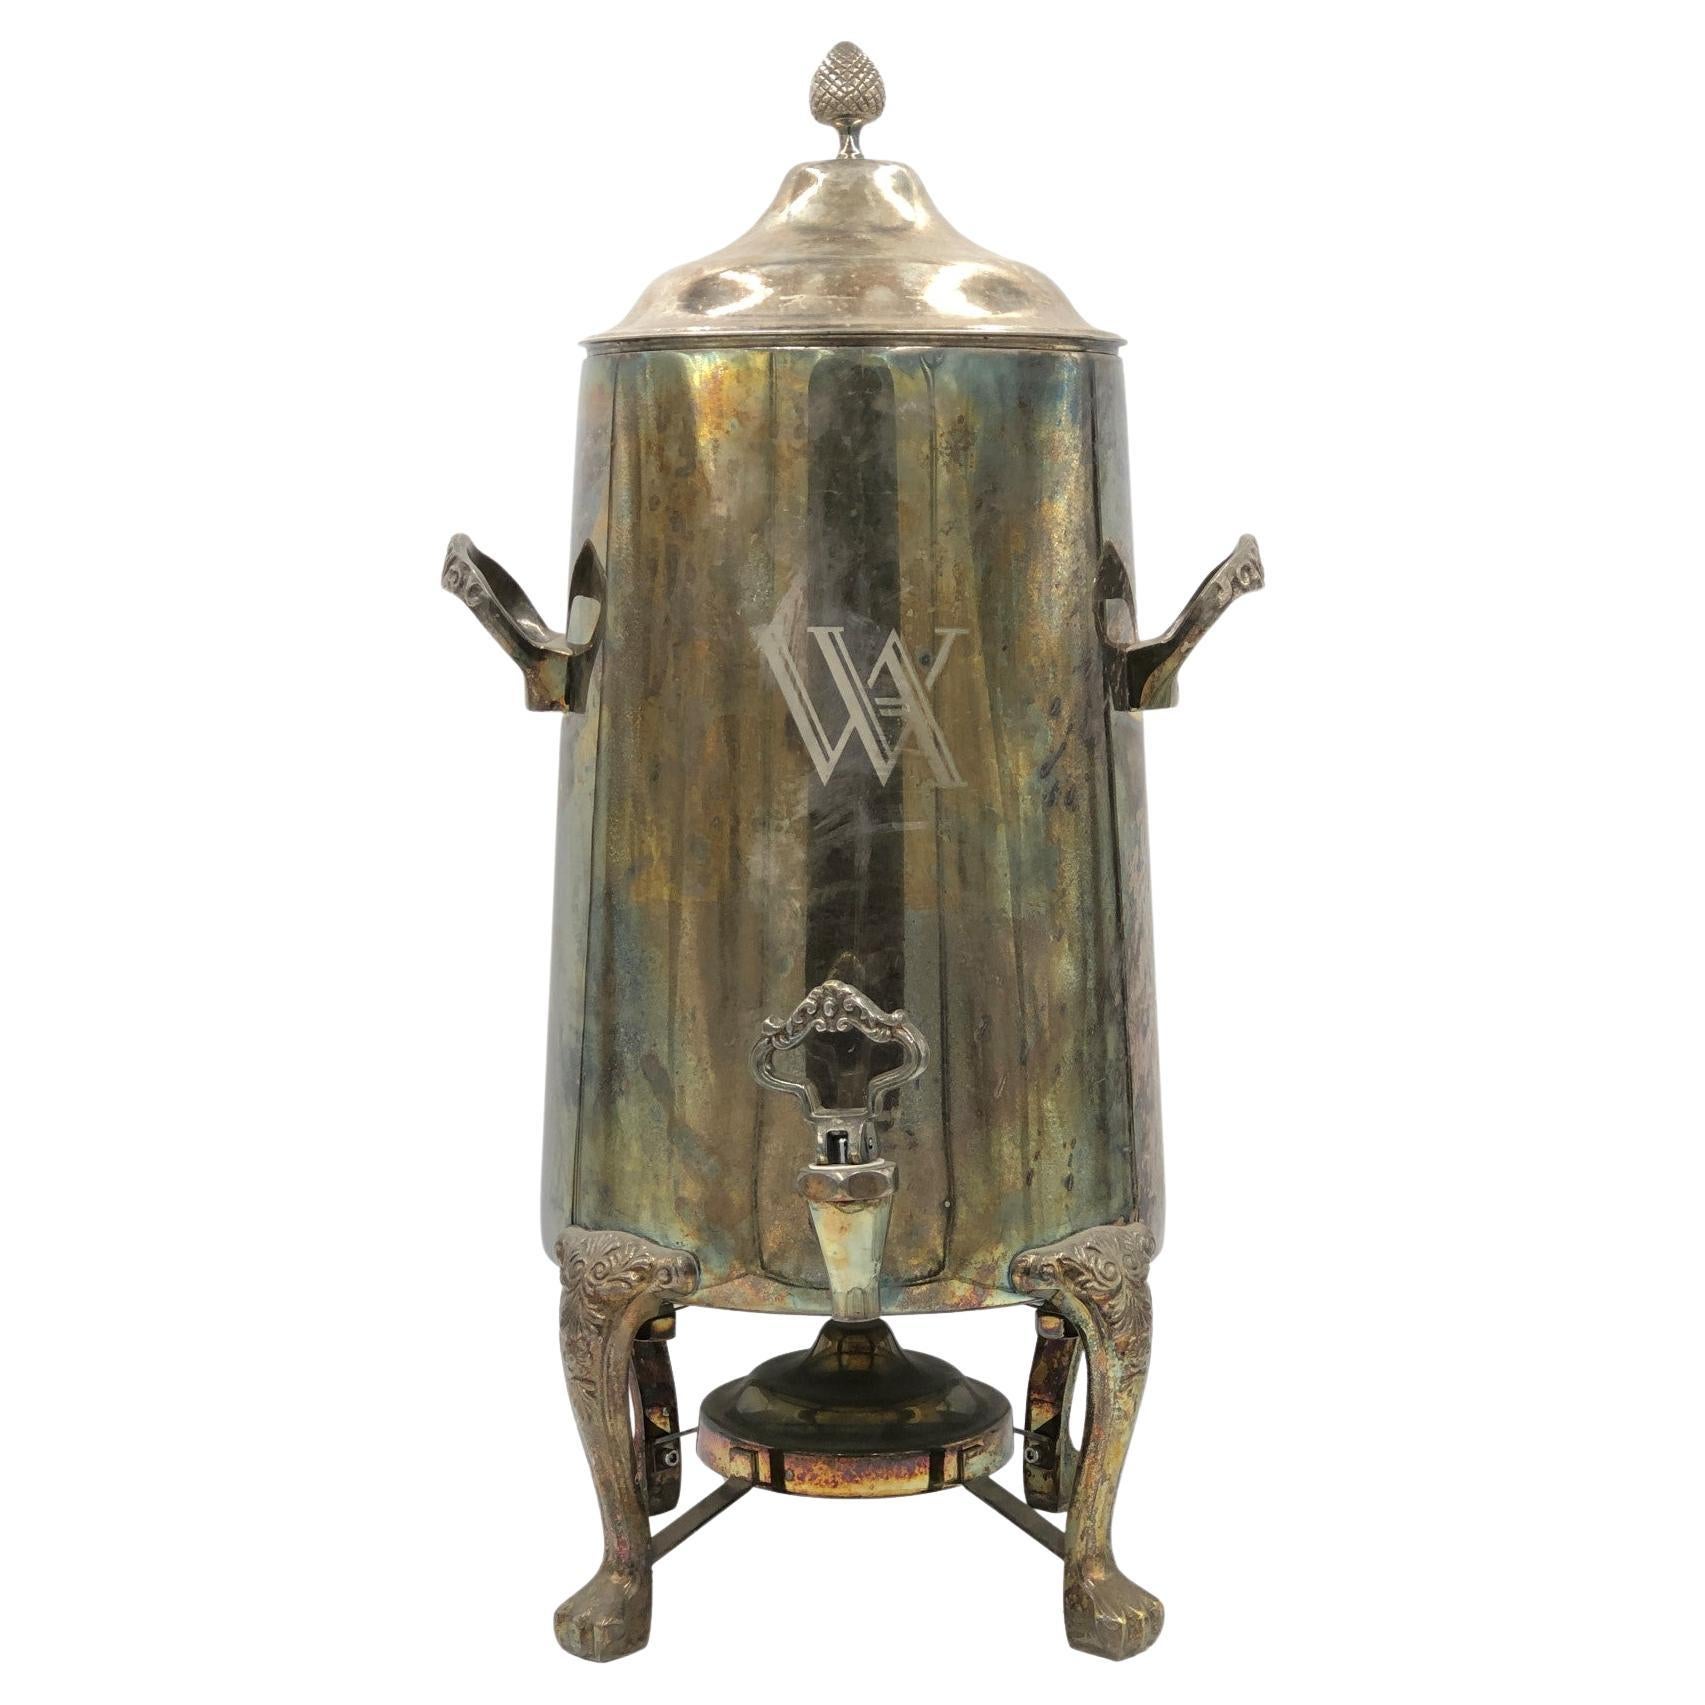 NYC Waldorf Astoria Hotel Silver Plated Water Chafer Urn